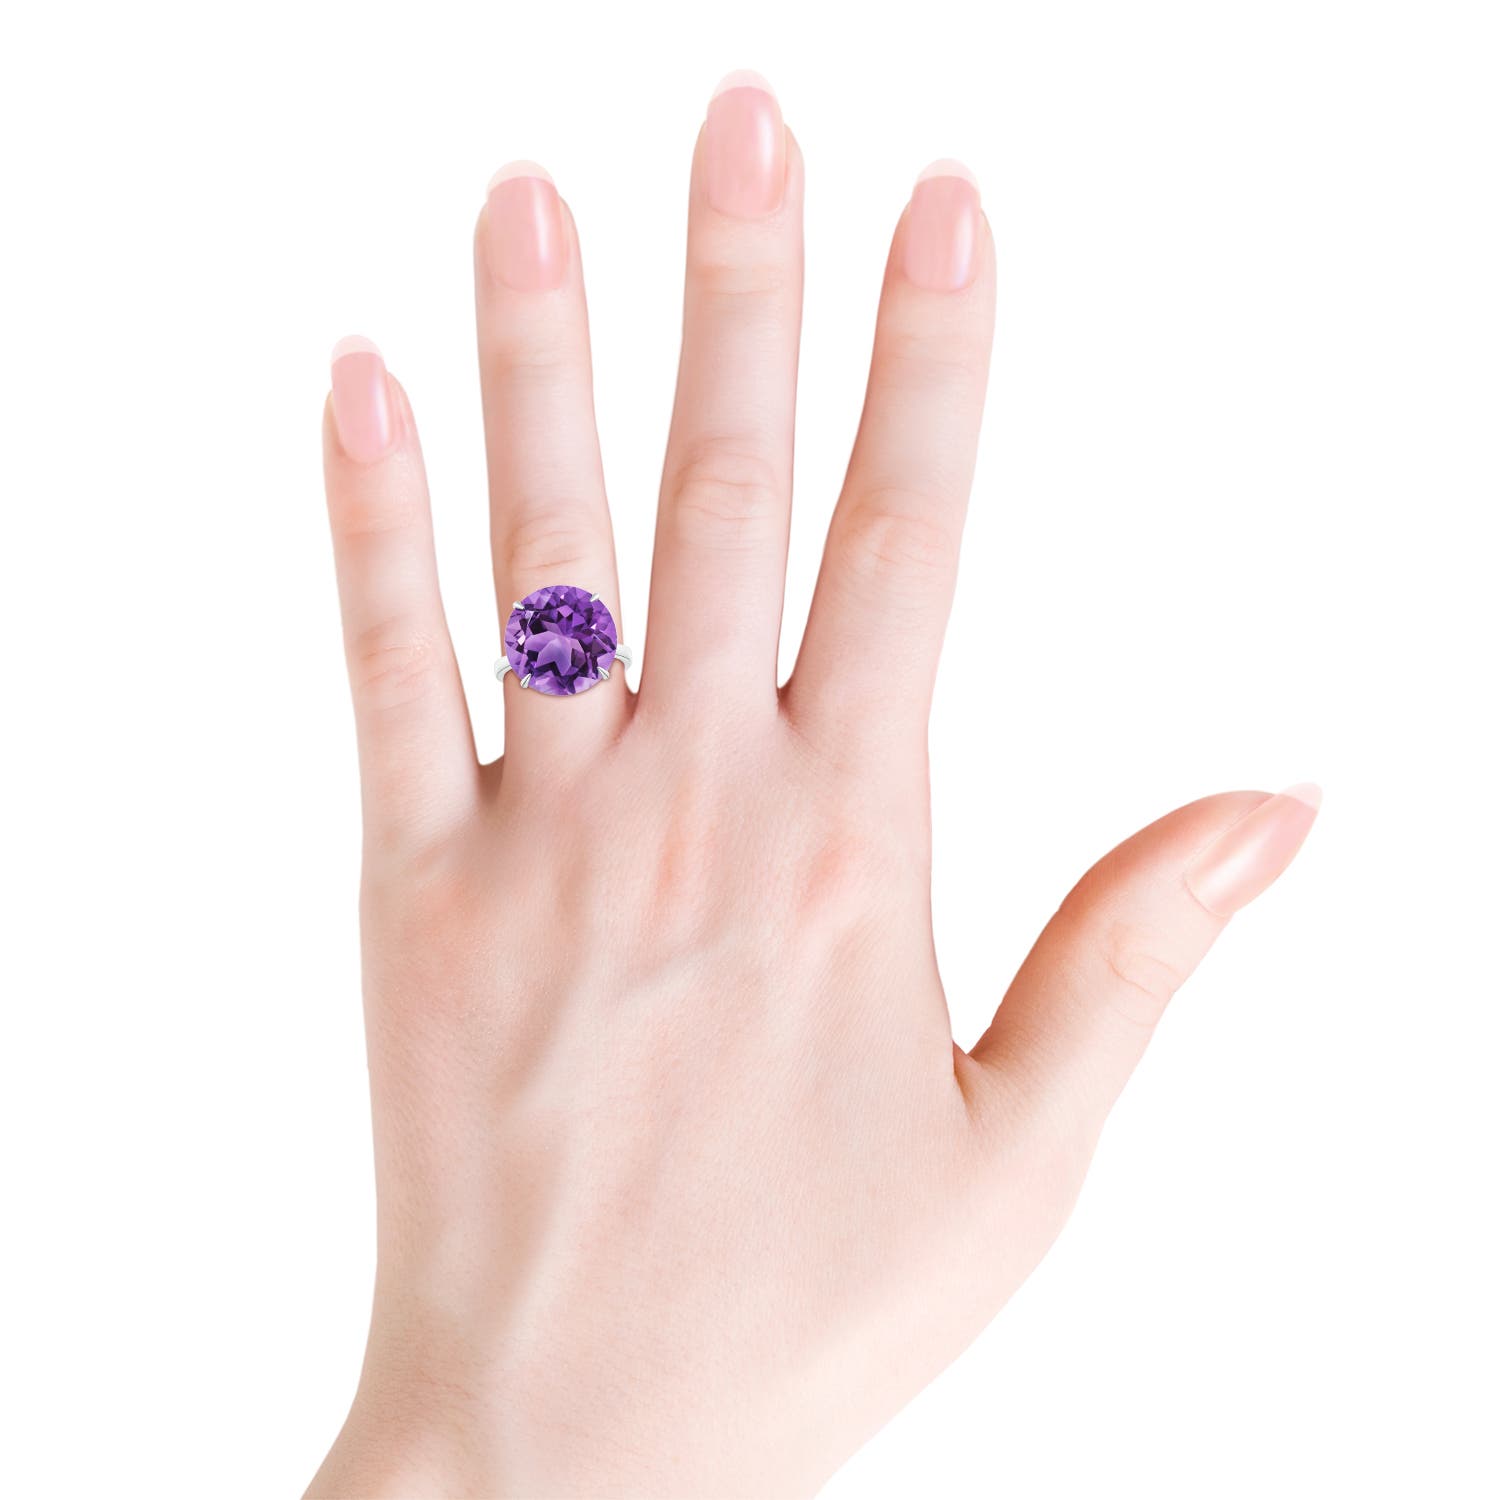 AA- Amethyst / 11 CT / 14 KT White Gold